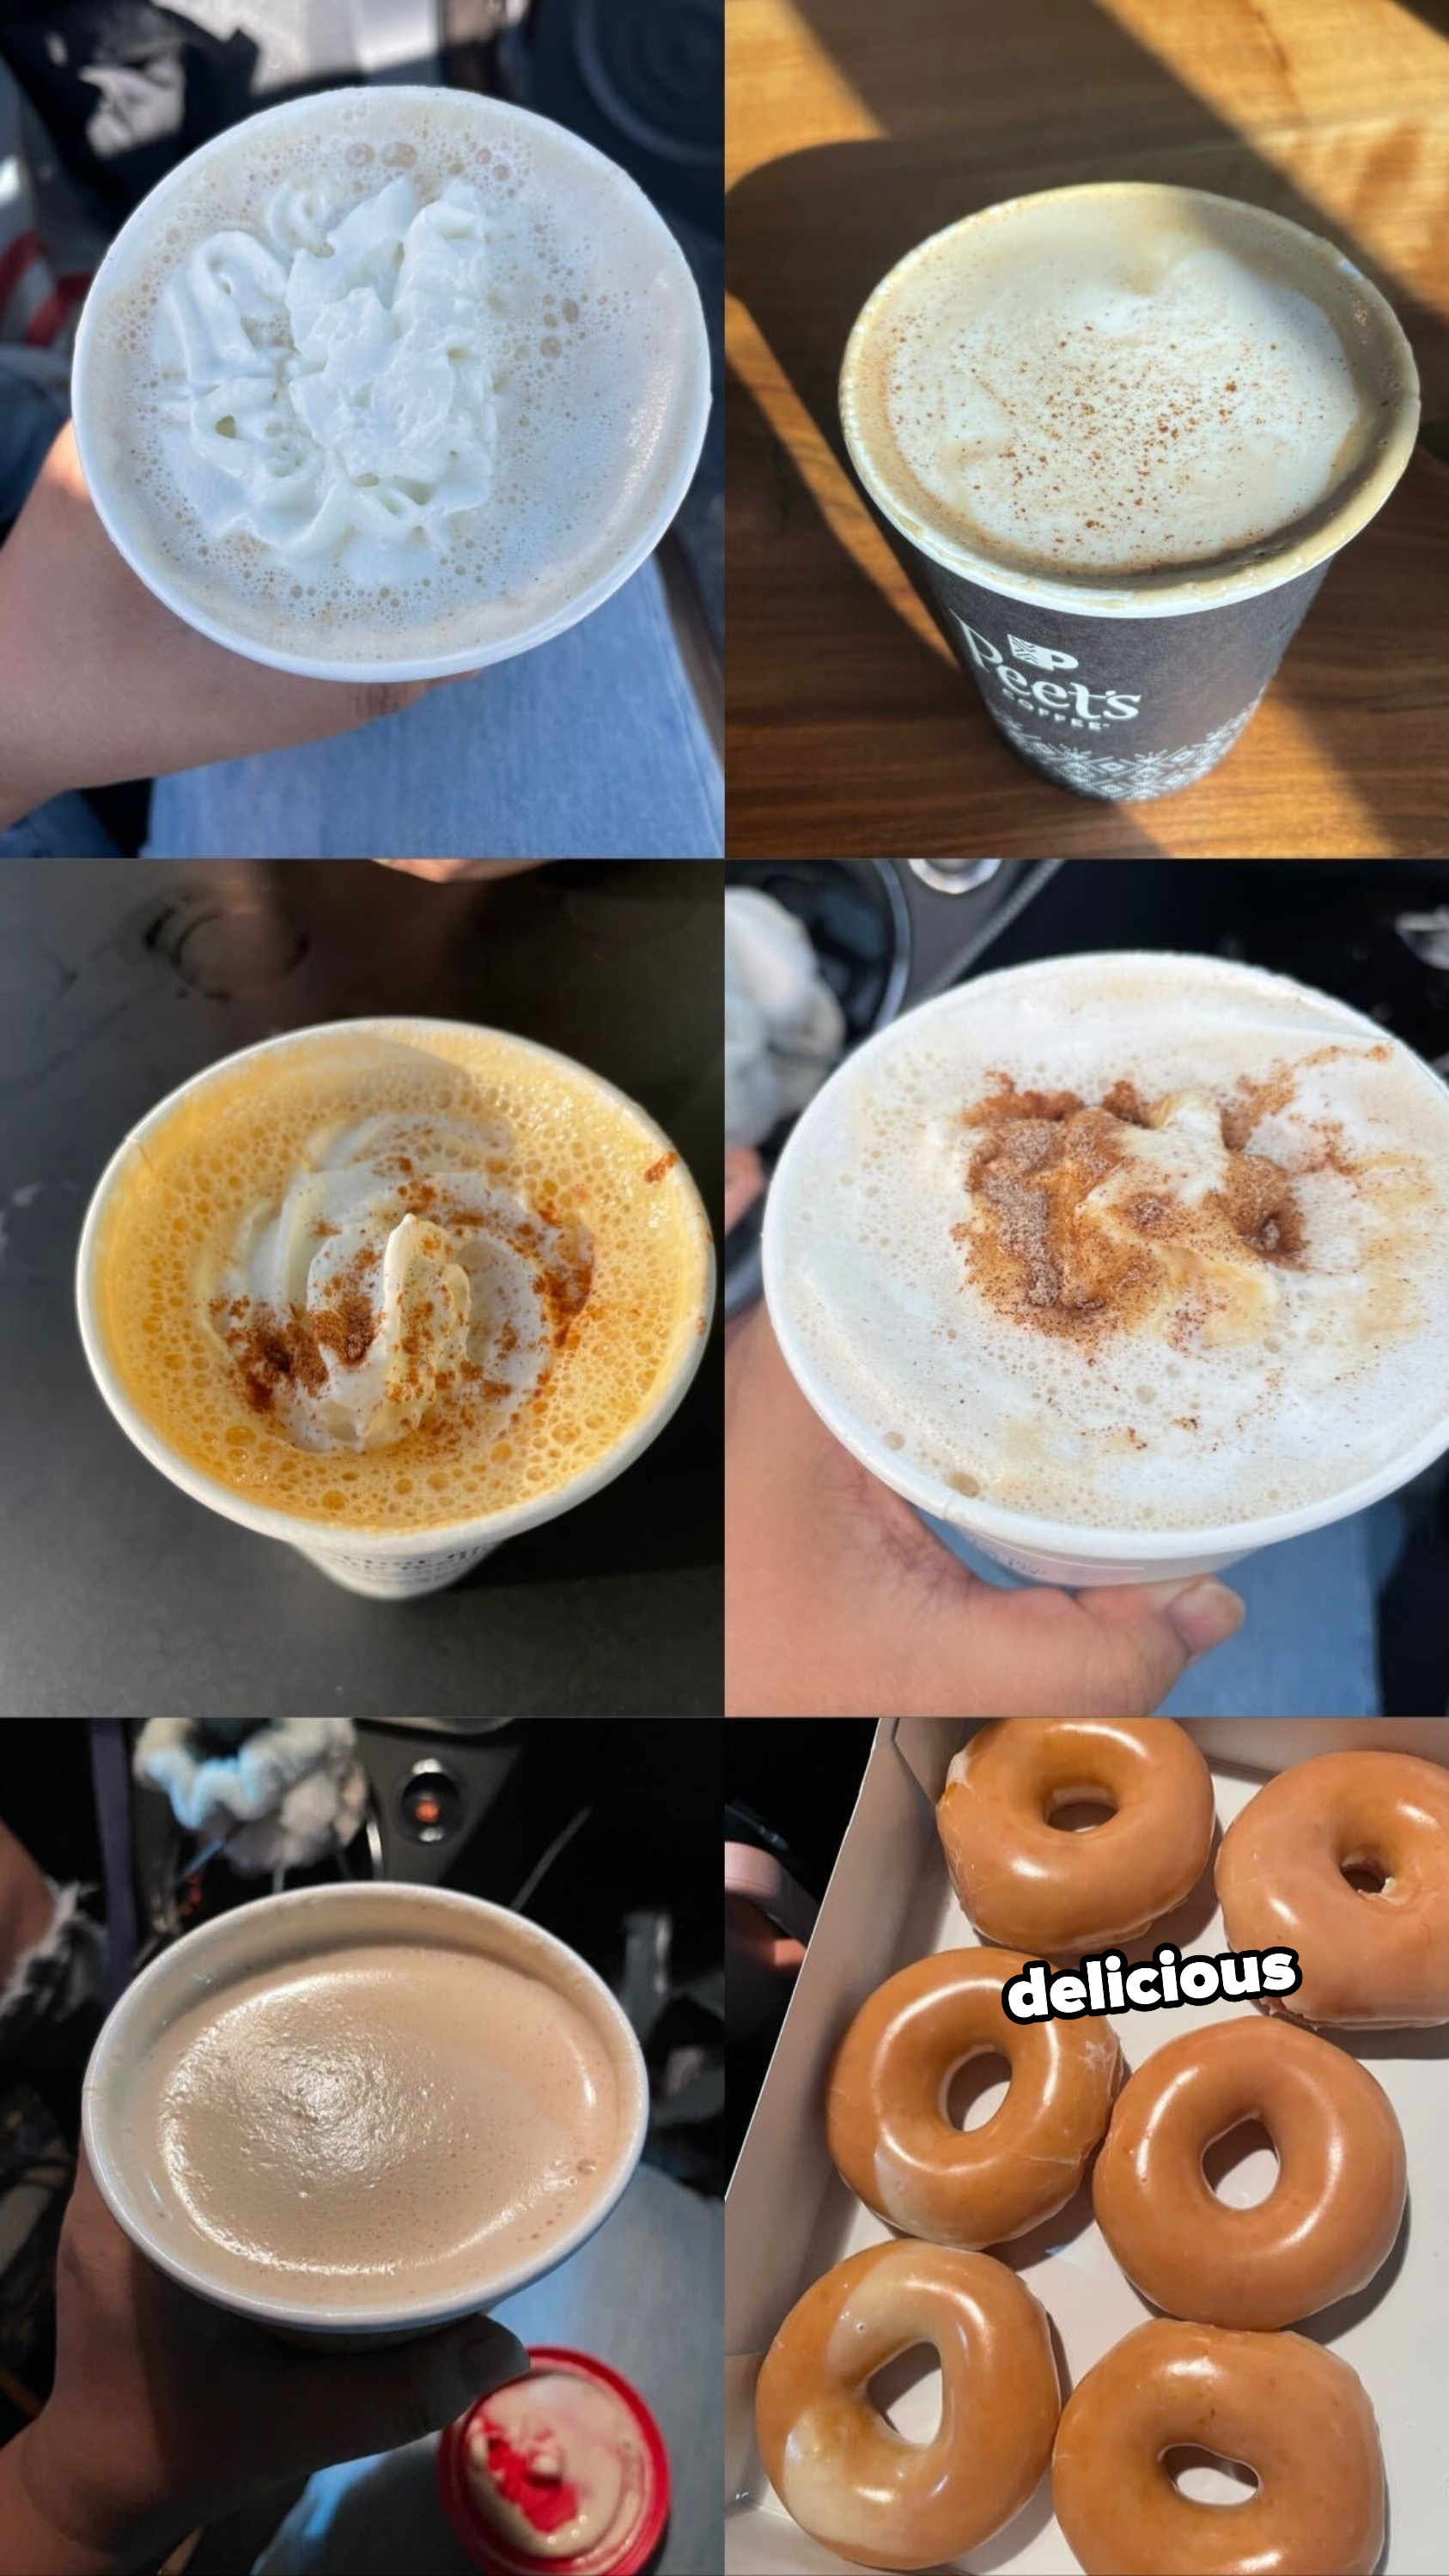 All the coffees uncovered are in a collage together